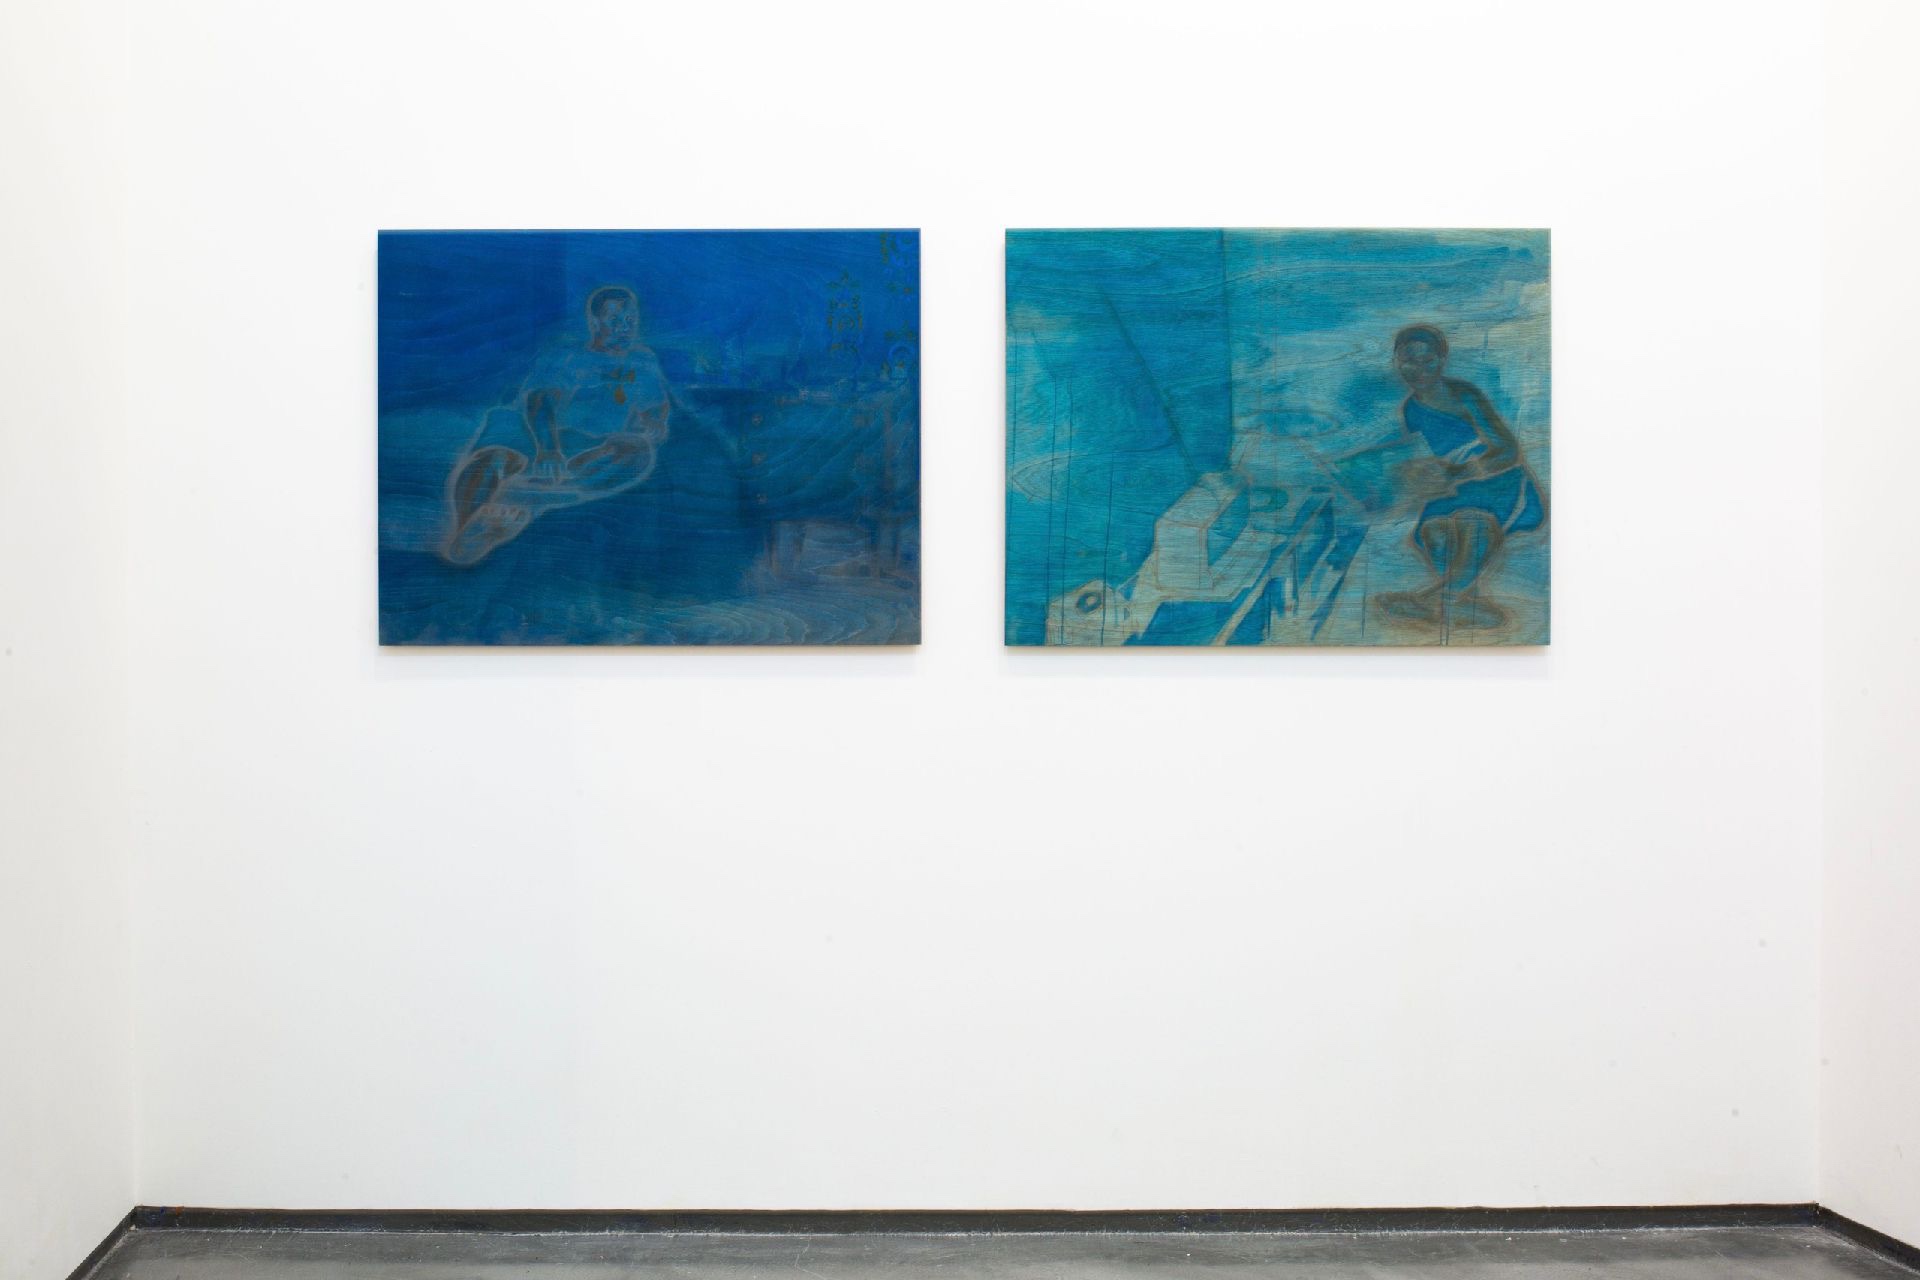 The work is a diptych, two paintings both including laying figures located in a stained blue bedroom. The figure on left seems to be reading a book while gazing back at the observer, the figure on the right isn't gazing at you but instead, he is looking at